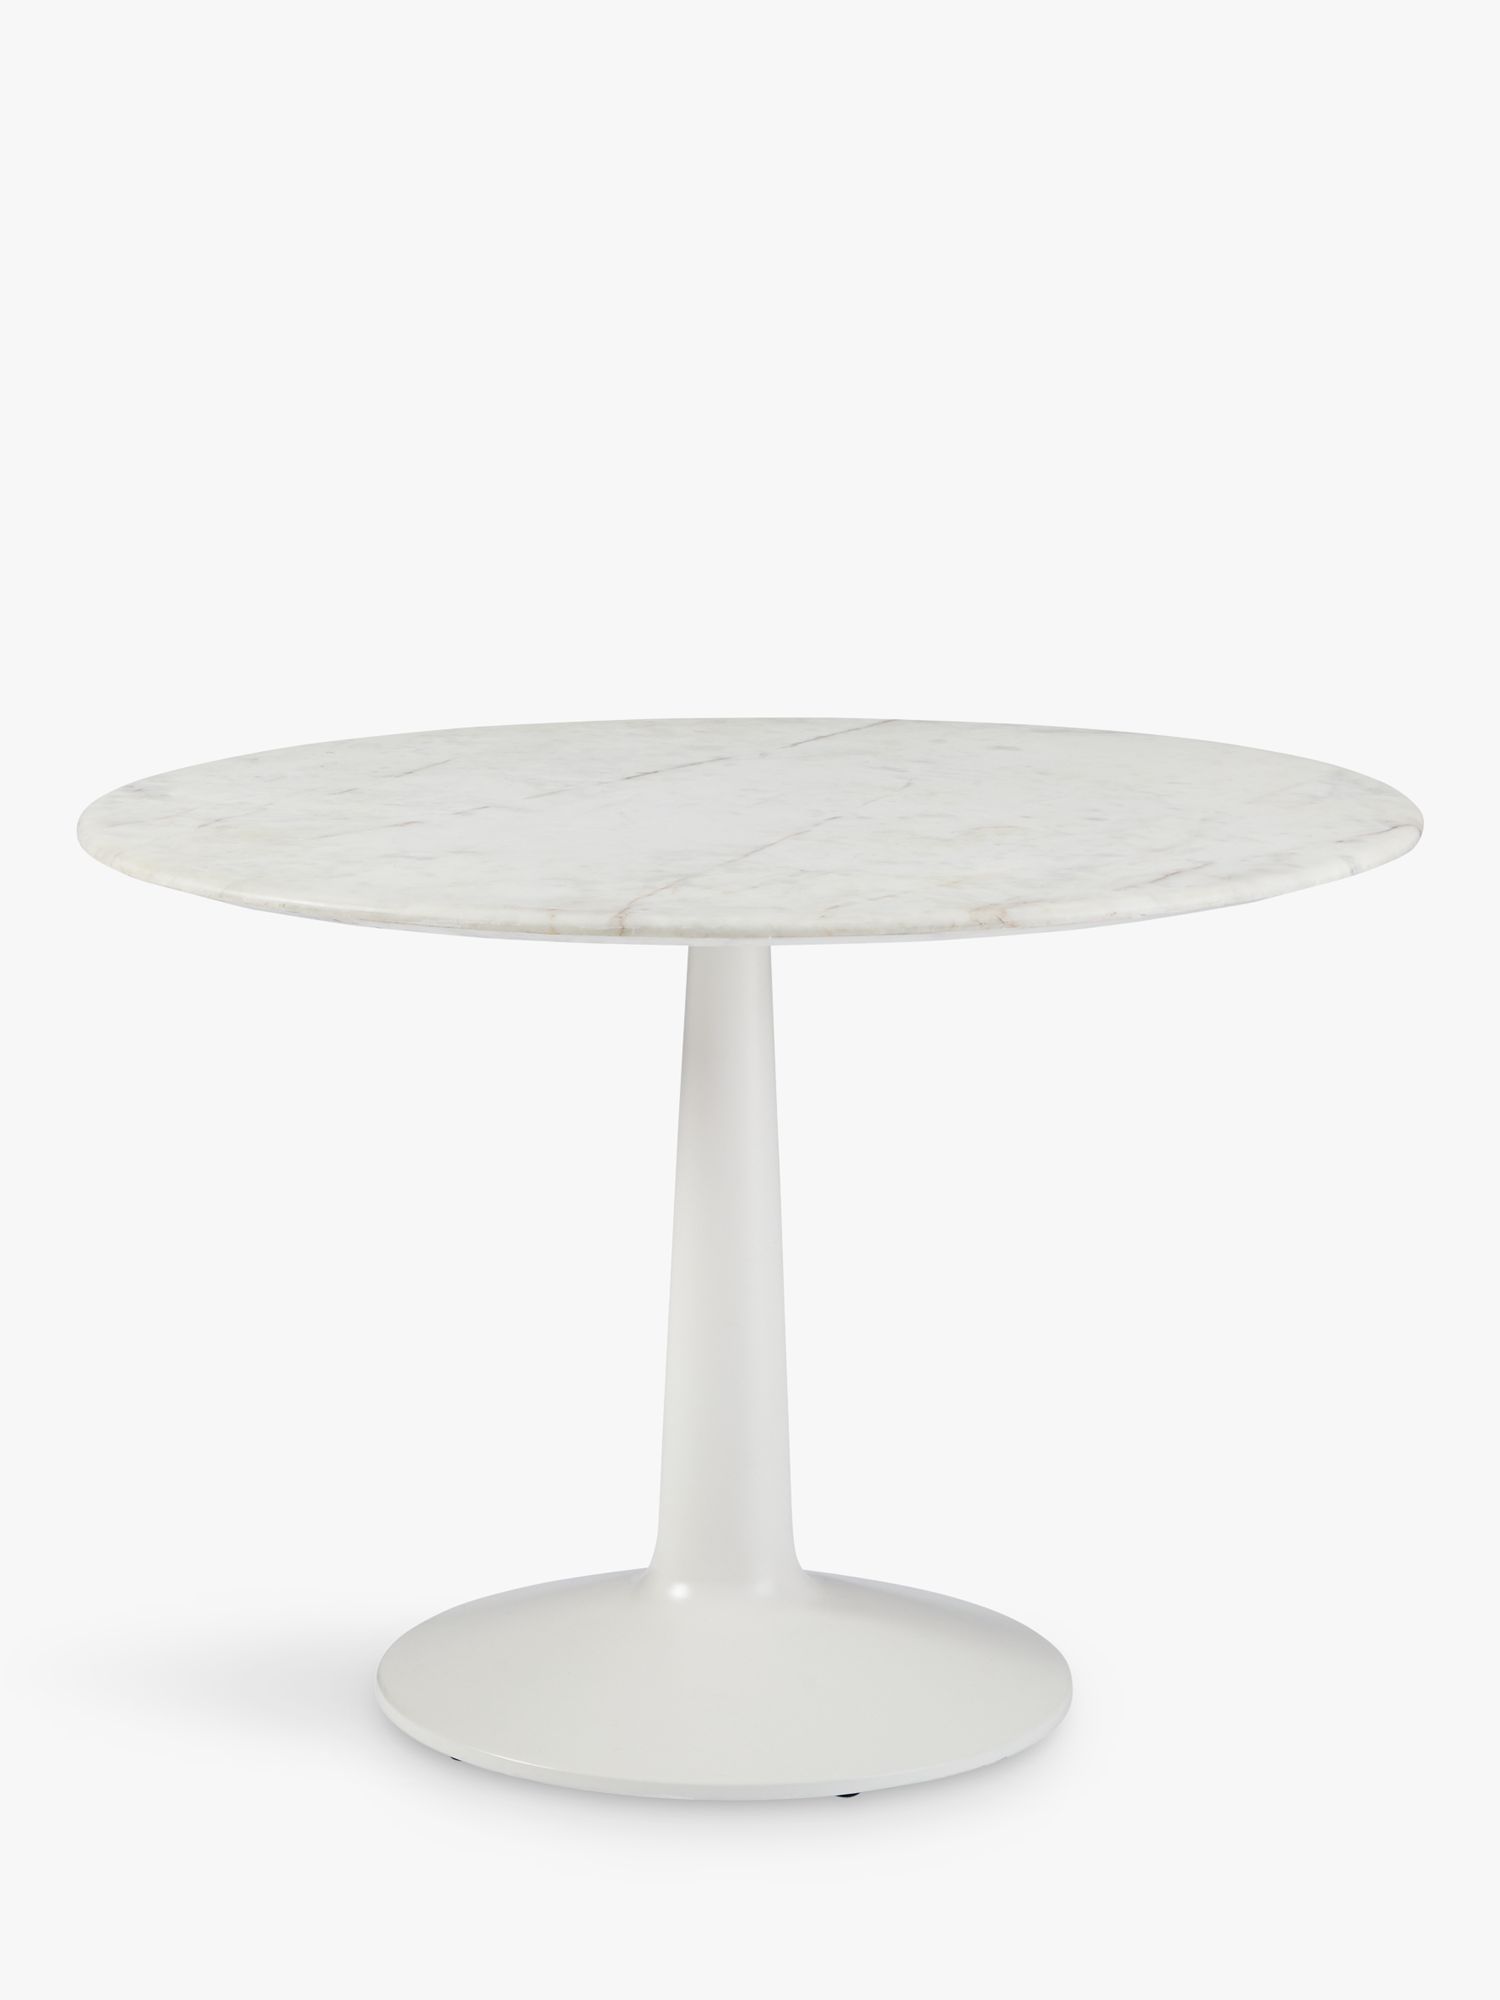 4 Seater Round Marble Dining Table White, West Elm Round Dining Table White